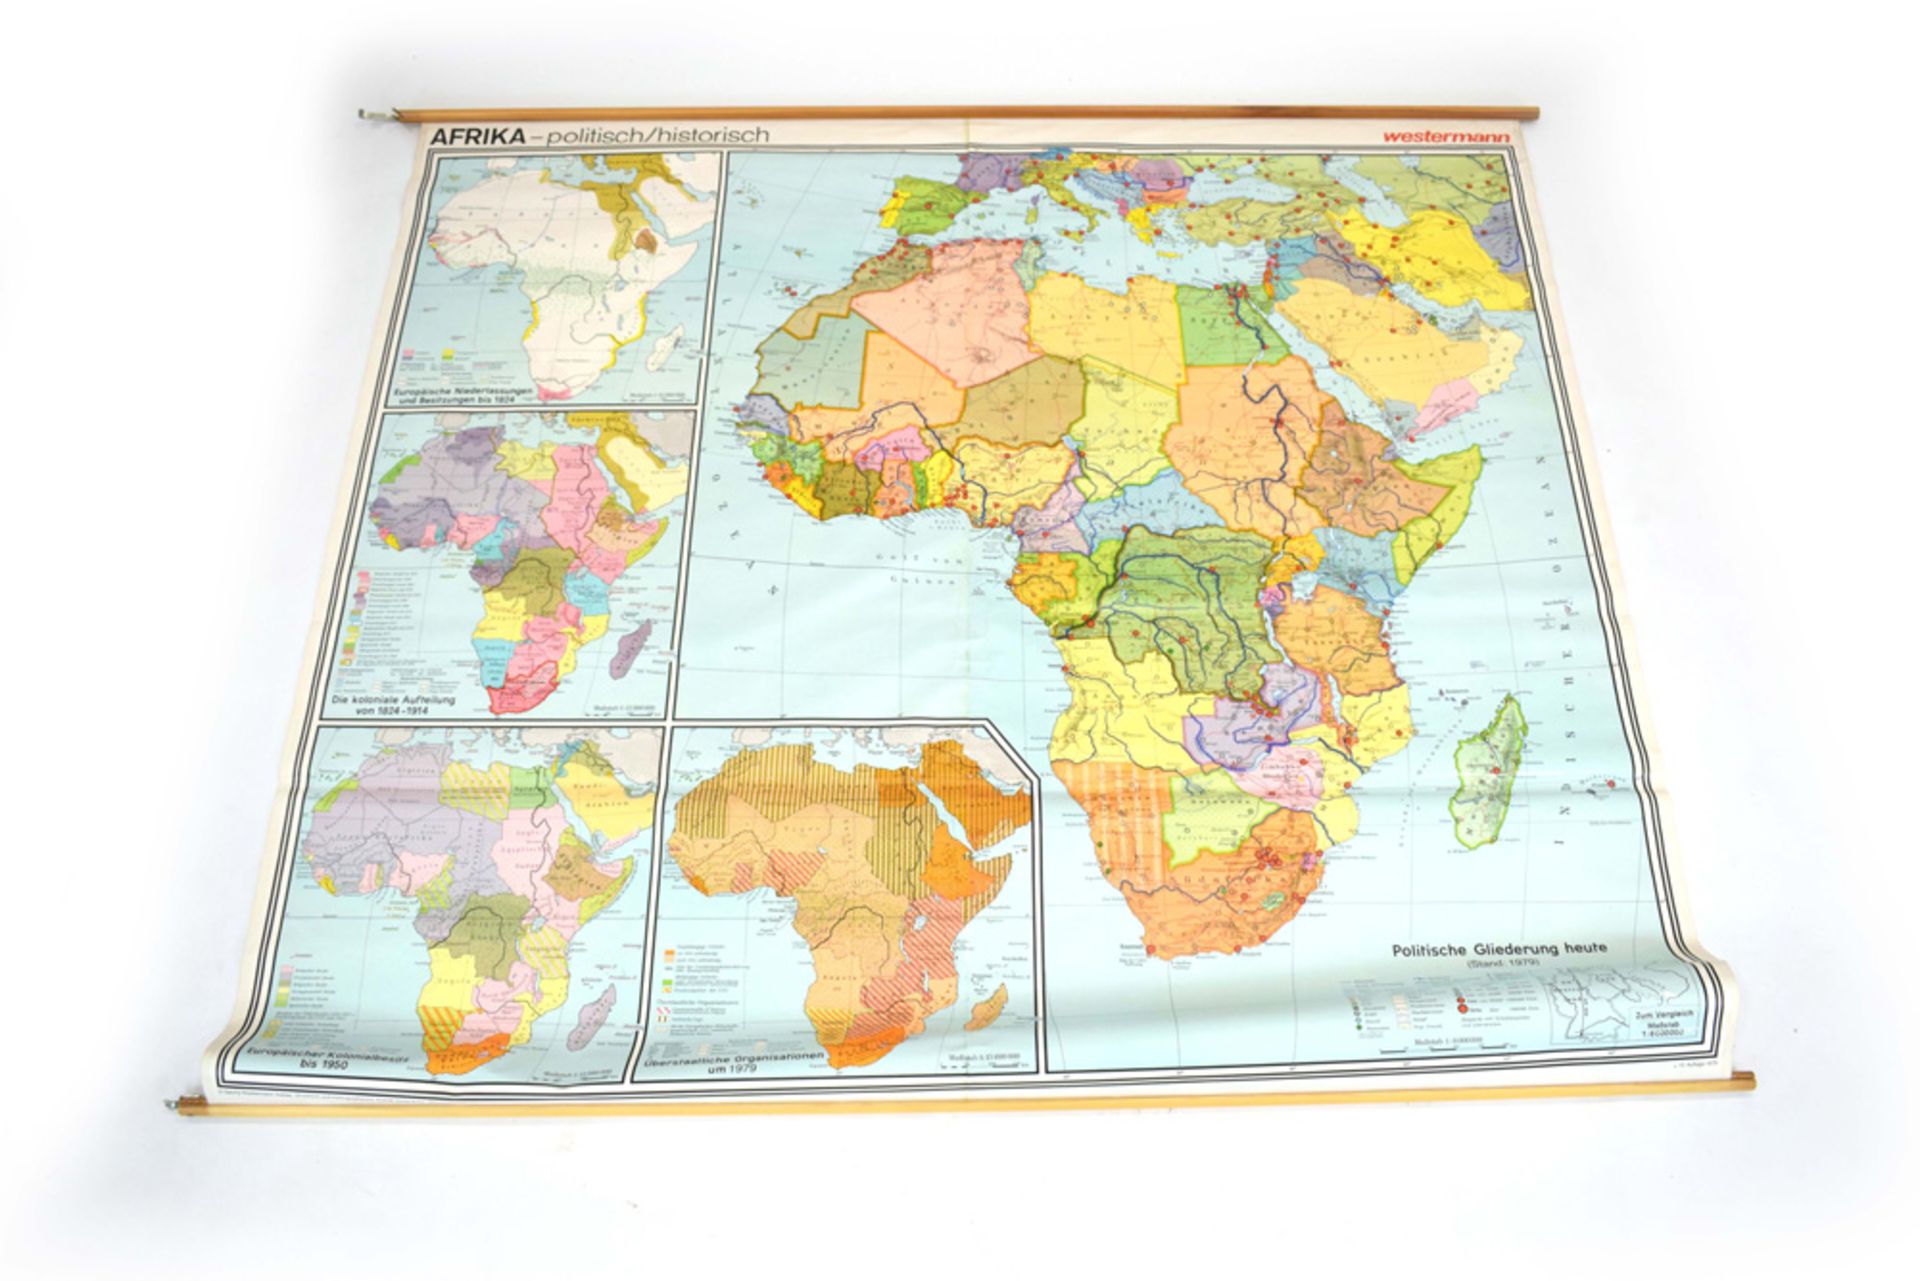 A 1979 Westermann historical and political wall chart of Africa,